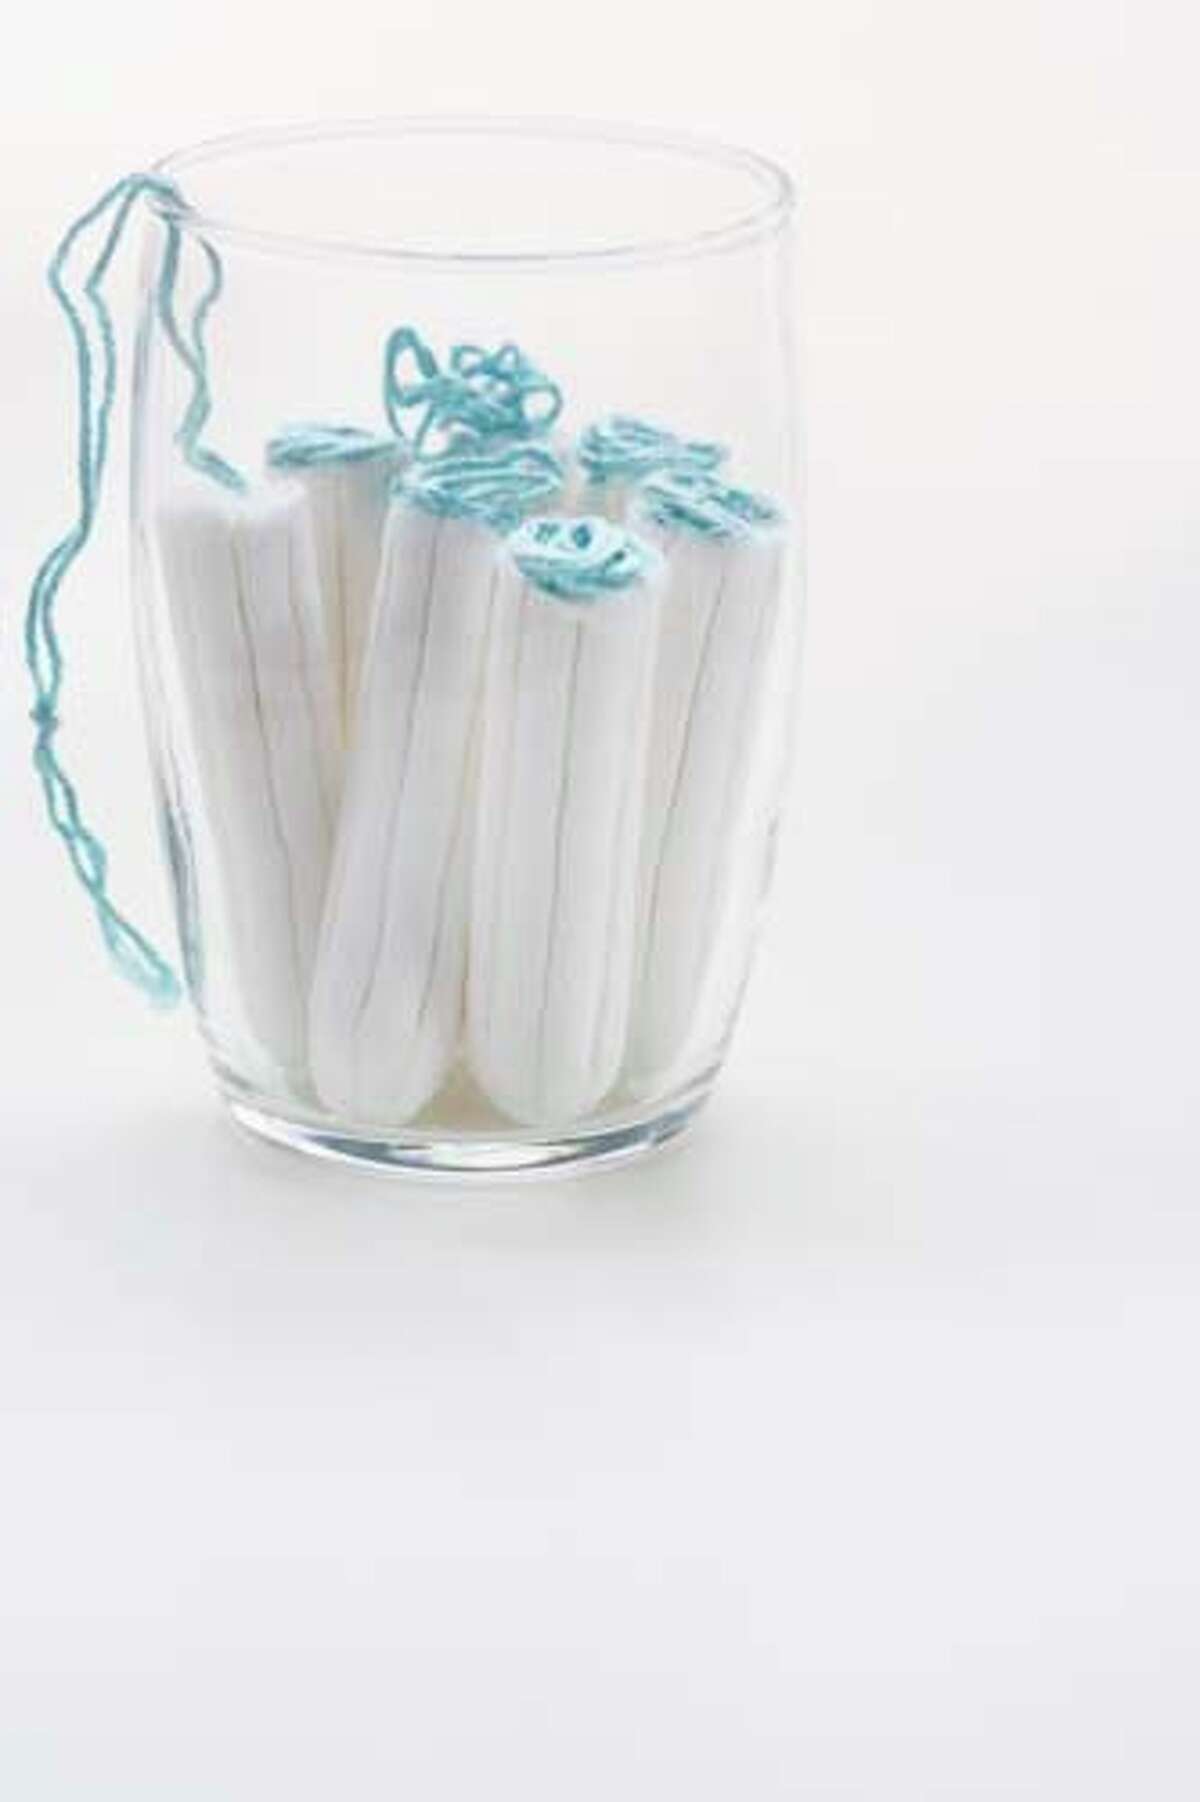 Legislation approved by the state Legislature would ensure women can know what's in the tampons they use.